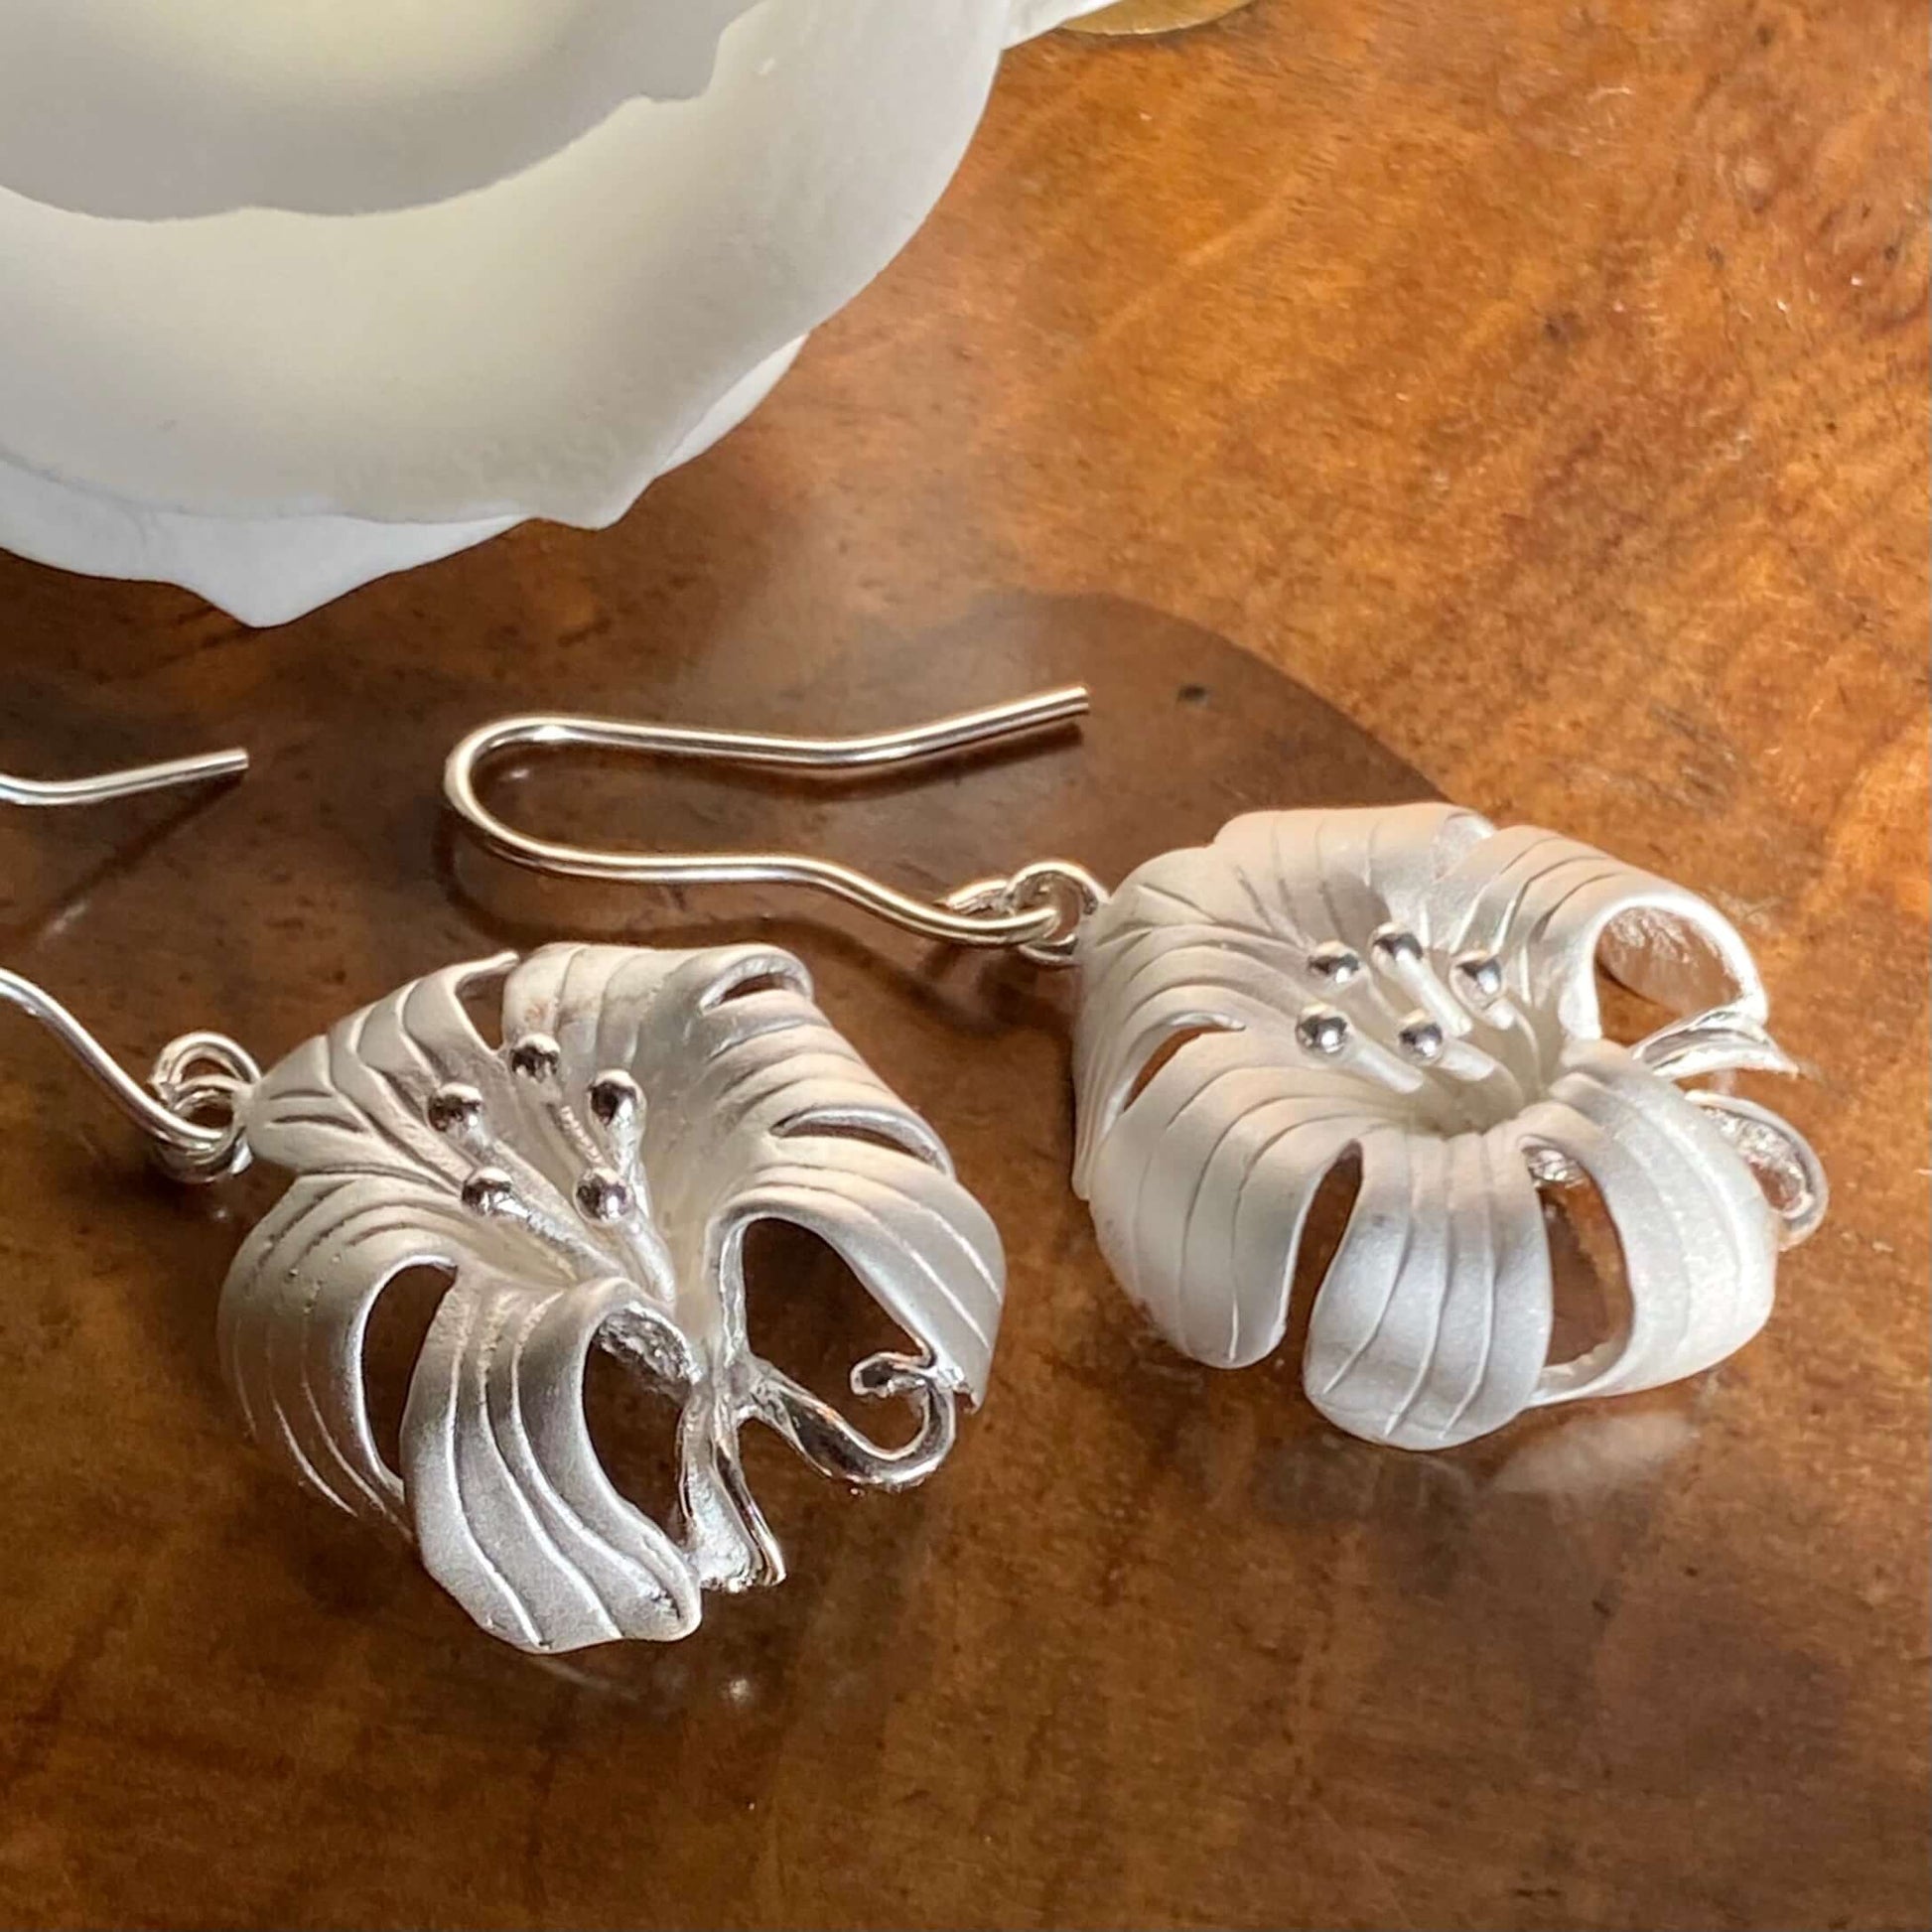 Large Sterling Silver Lily Earrings - Twelve Silver Trees